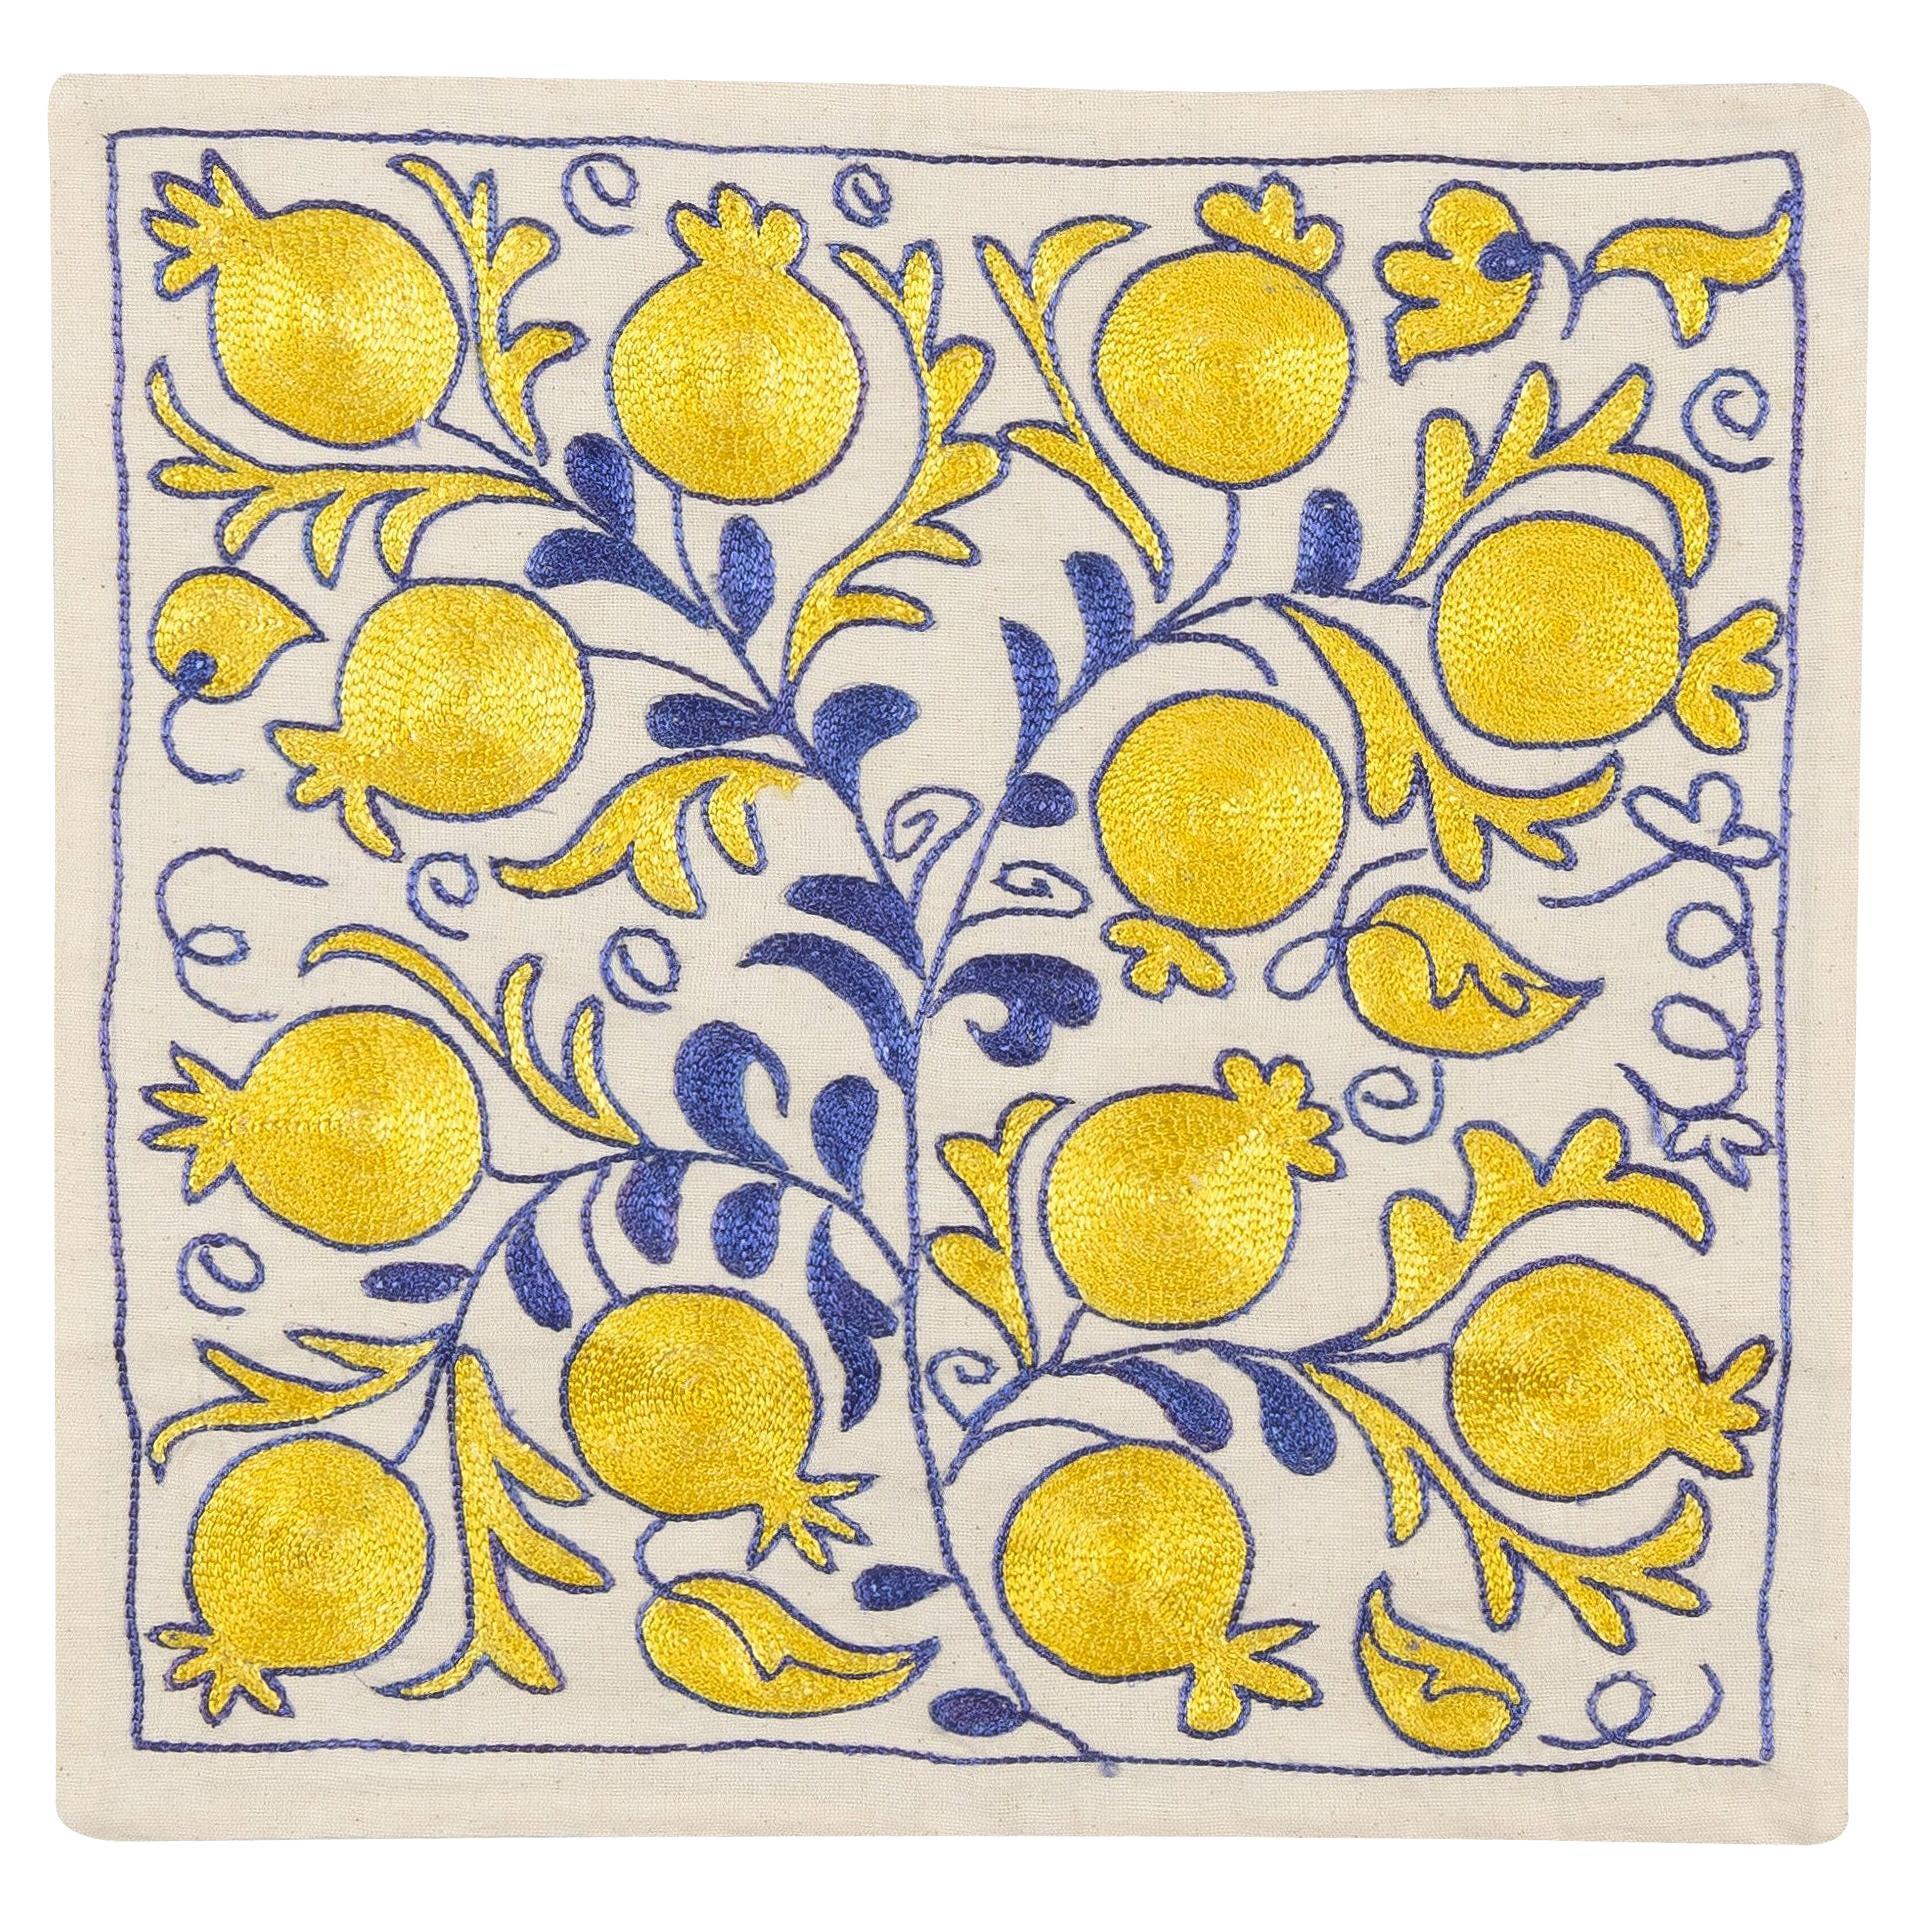 19"x19" Modern Silk Embroidered Suzani Cushion Cover in Ivory, Yellow & Blue For Sale